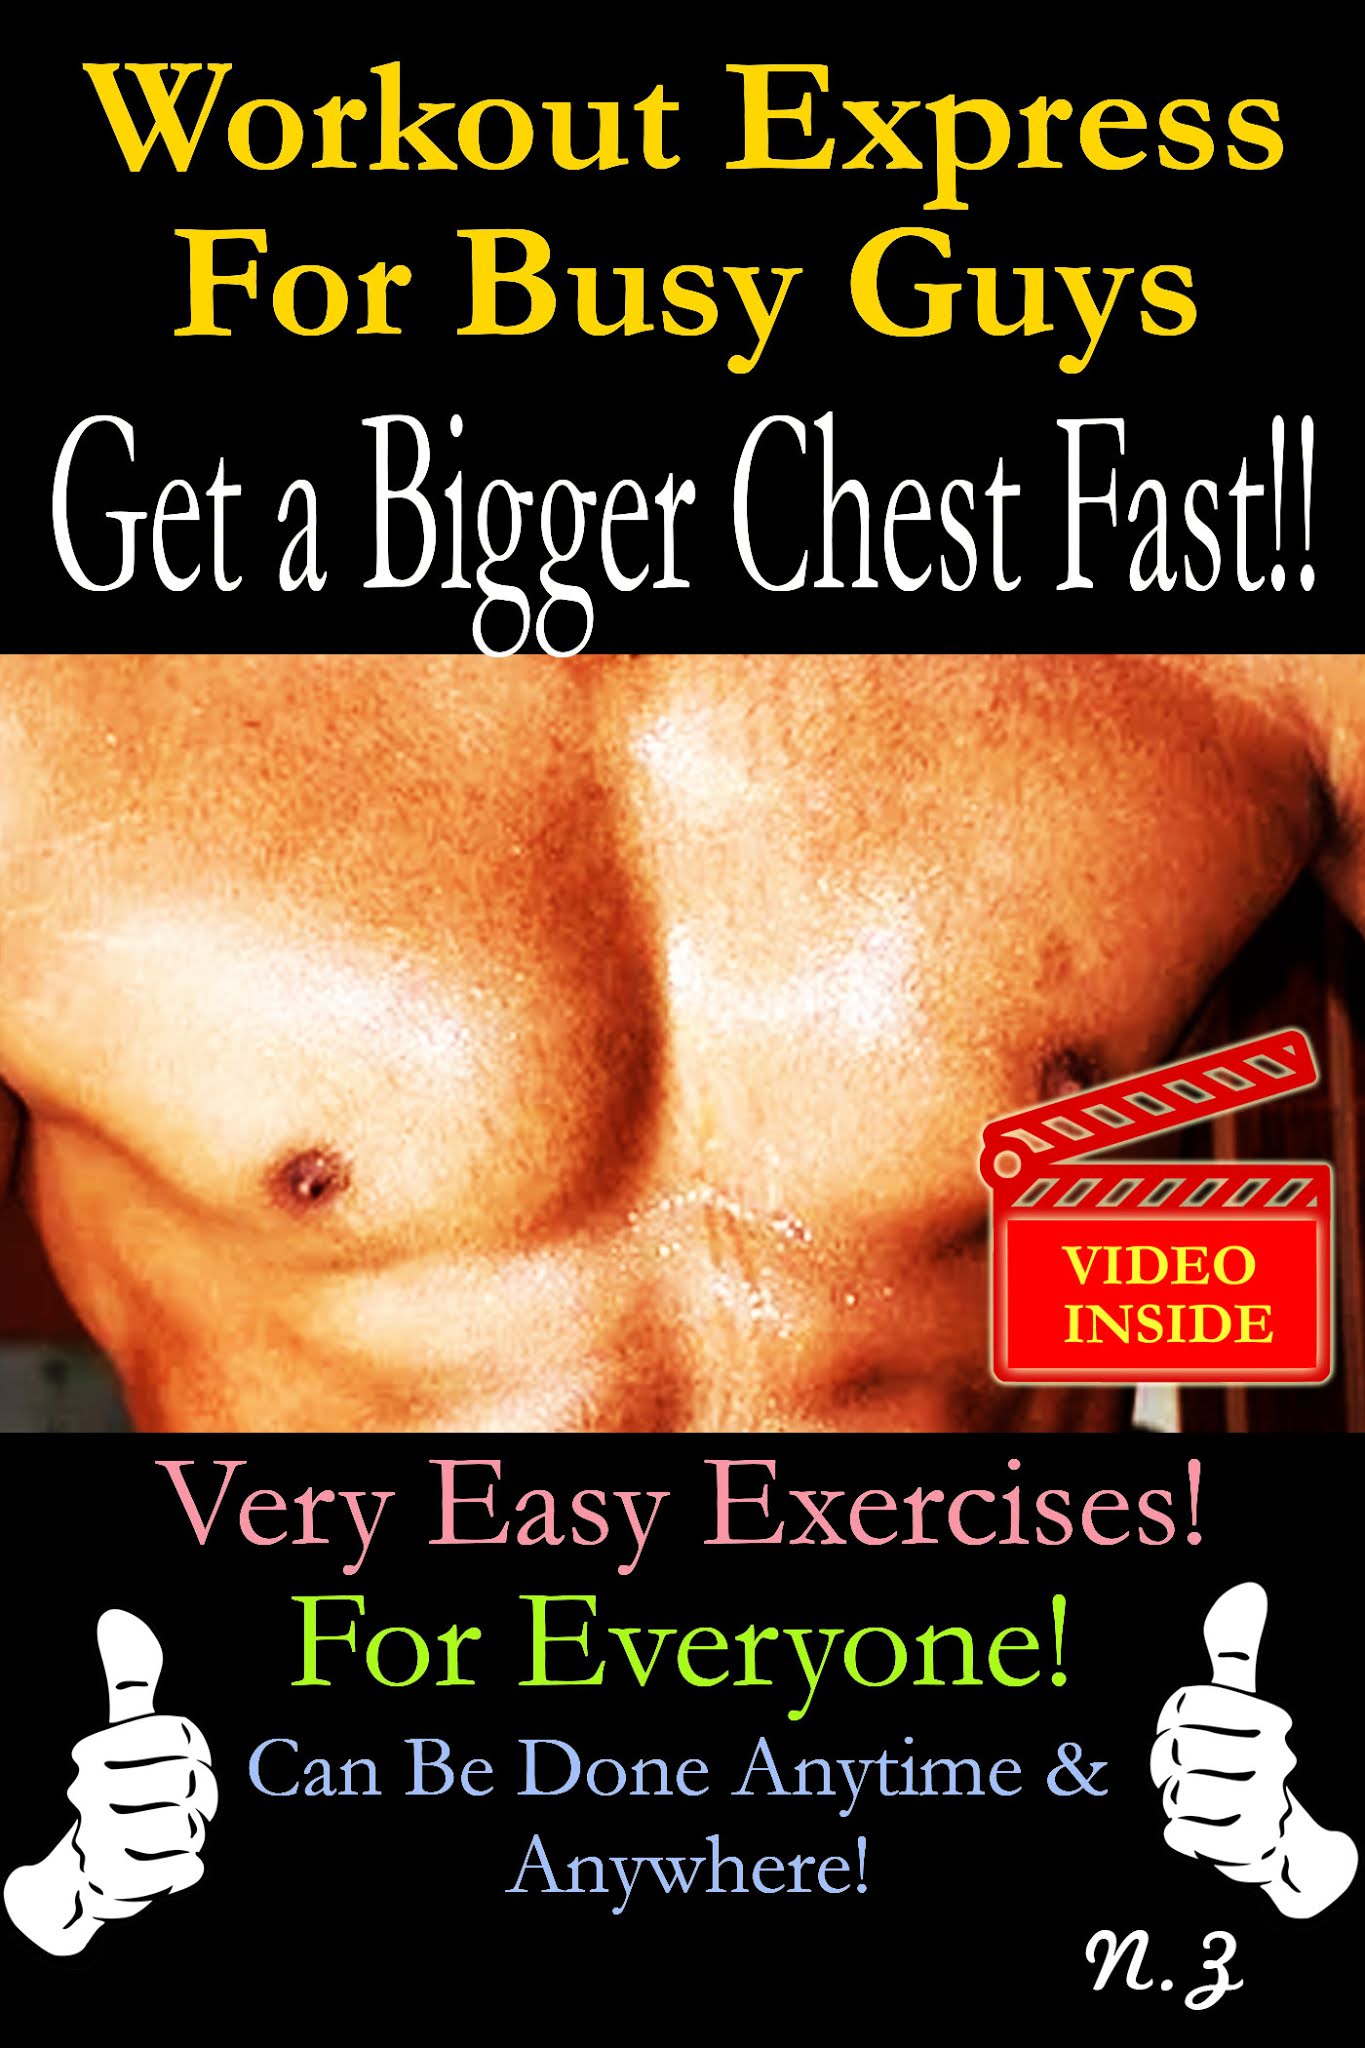 Workout Express For Busy Guys: Get A Bigger Chest Fast!!